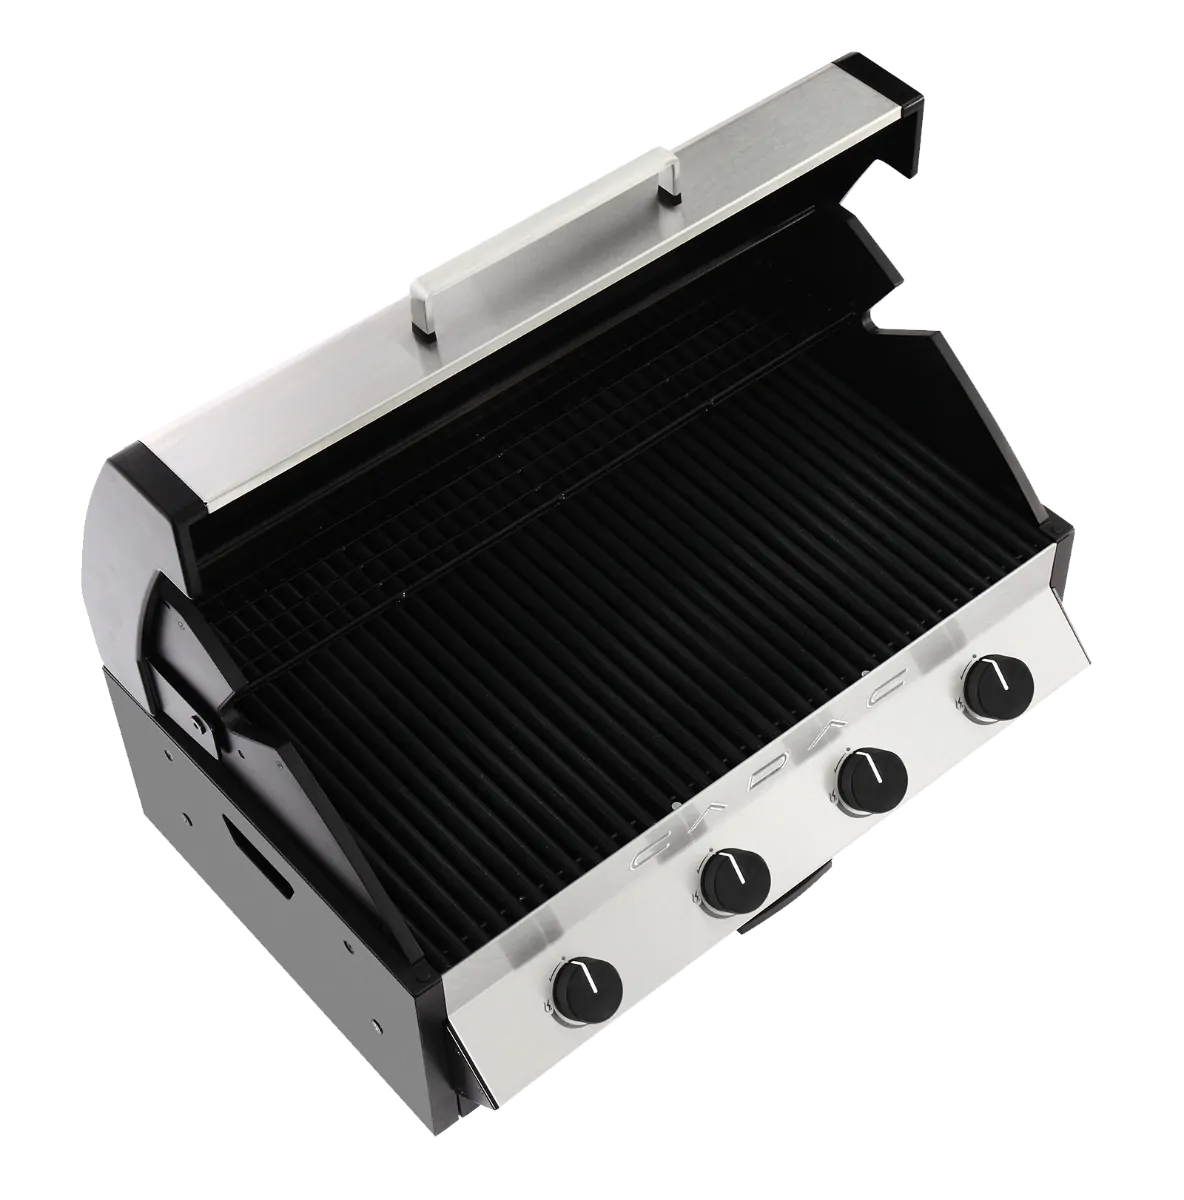 Cadac Meridian 4 Burner Built-In Counter Top Gas Barbecue